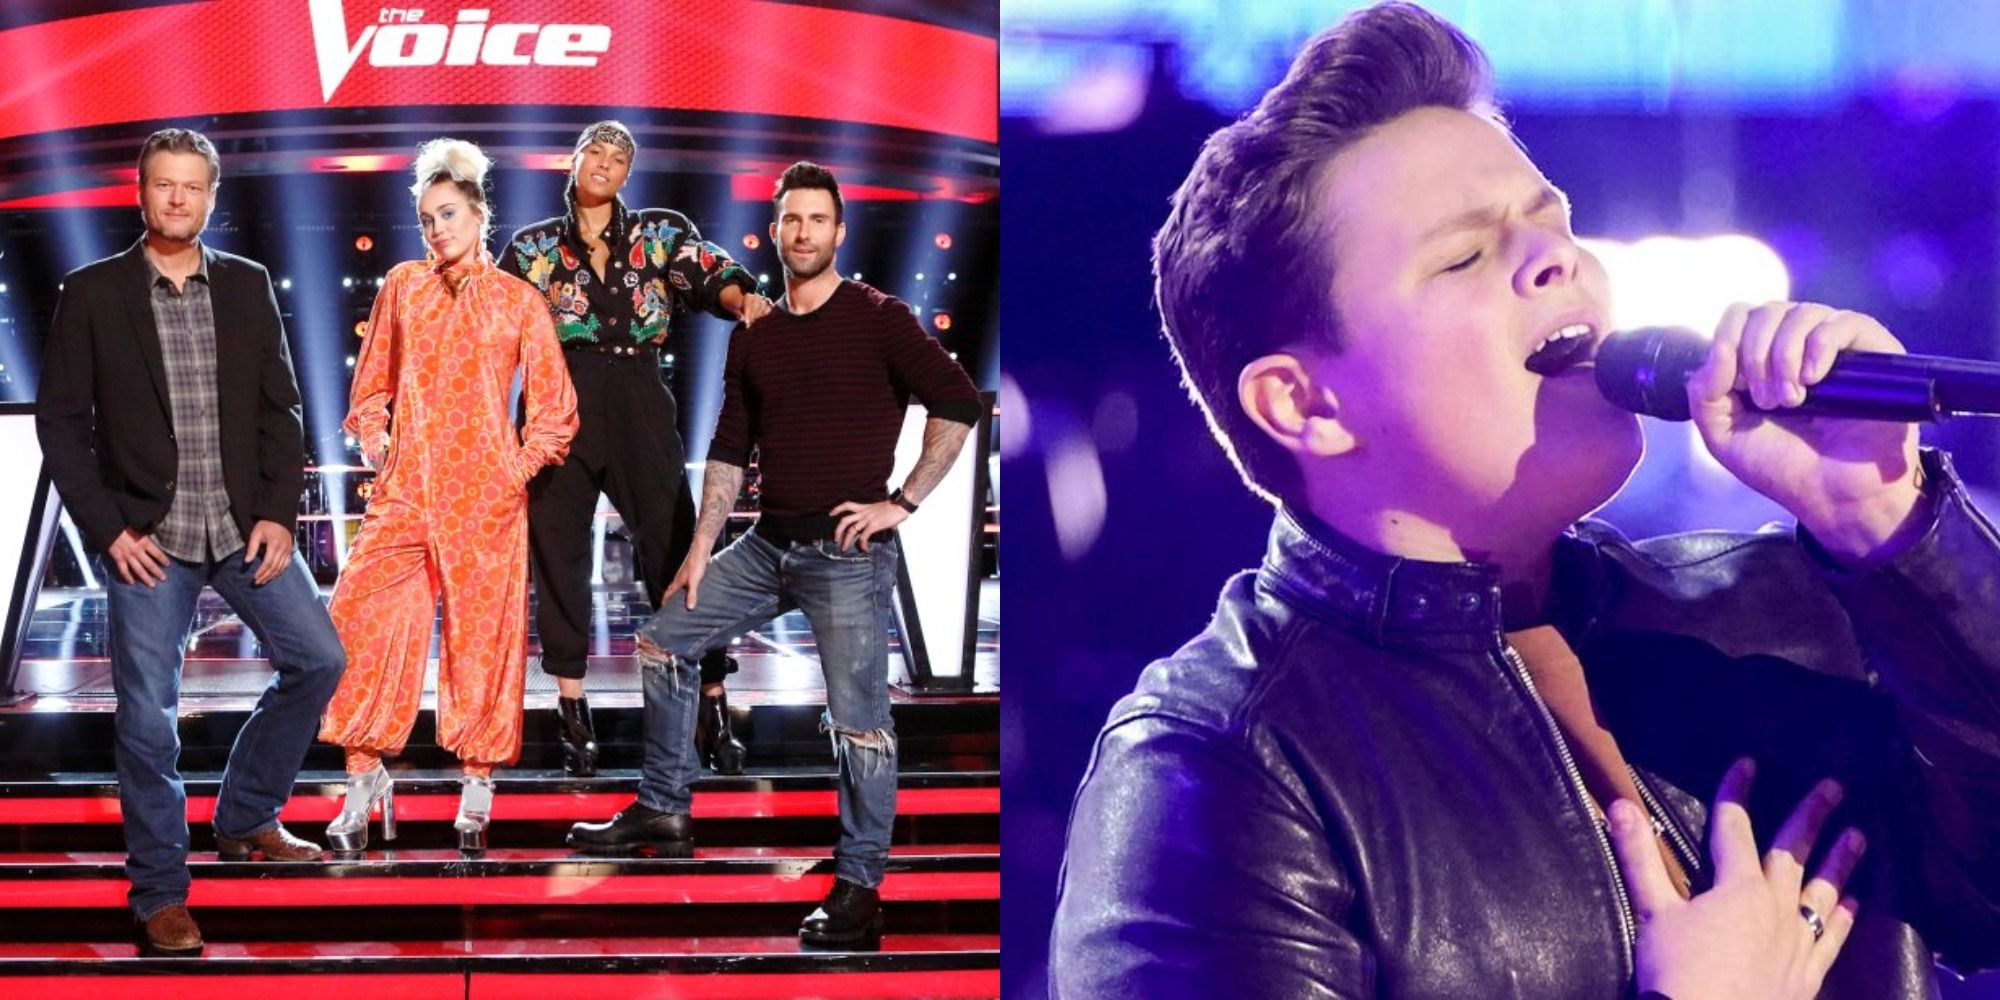 The Voice judges in an image next to the 2020 winner